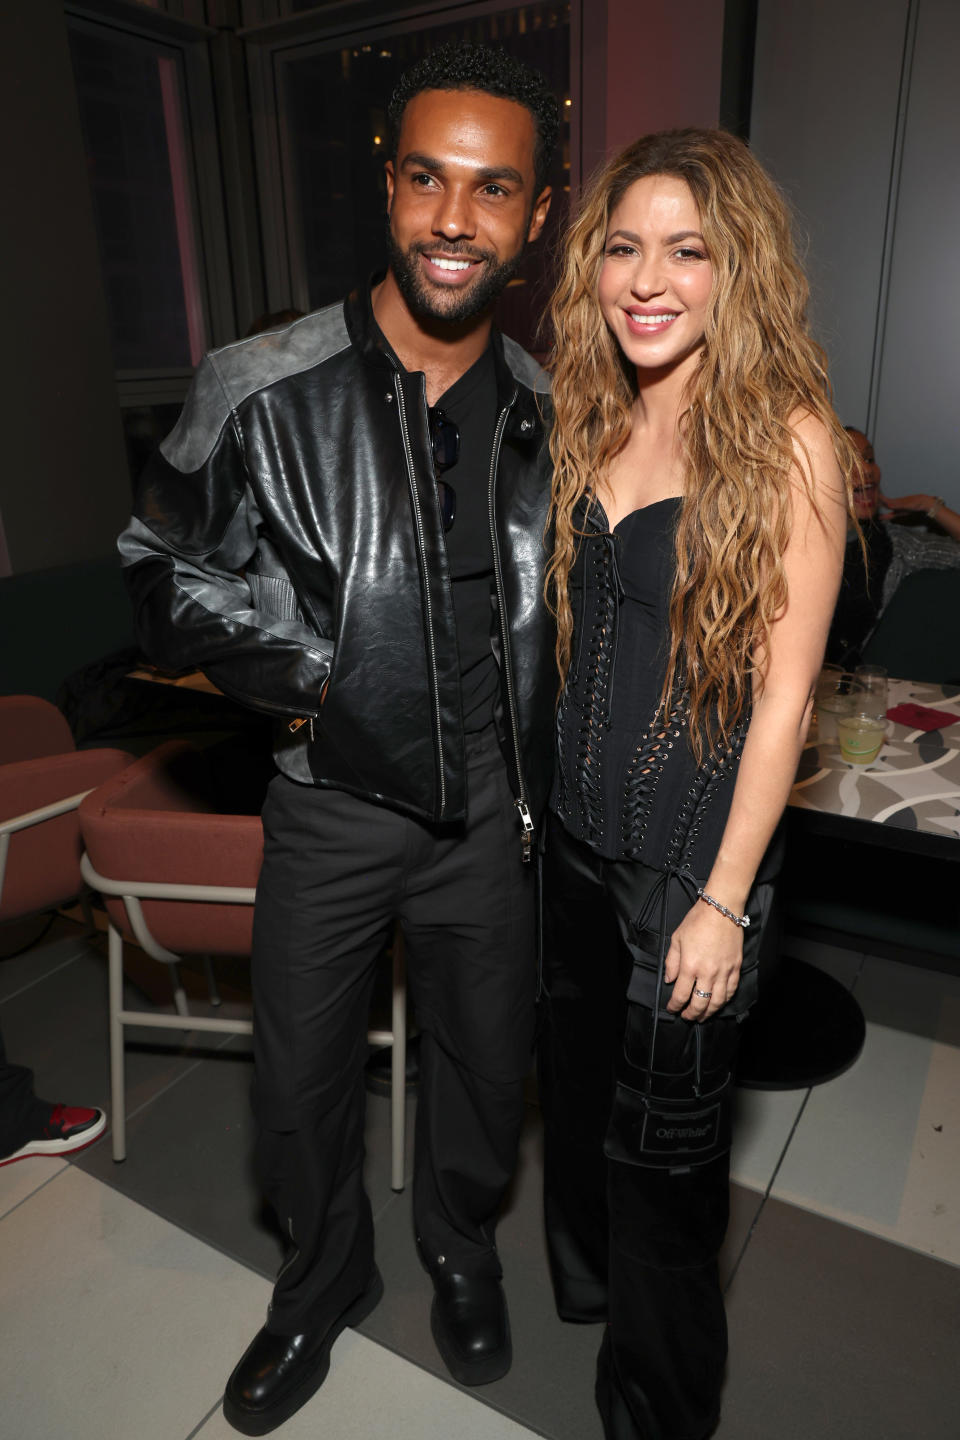 NEW YORK, NEW YORK - MARCH 26: (L-R) Lucien Laviscount and Shakira attend as Shakira performs live at TSX In Times Square on March 26, 2024 in New York City. (Photo by Kevin Mazur/Getty Images for TSX Entertainment)